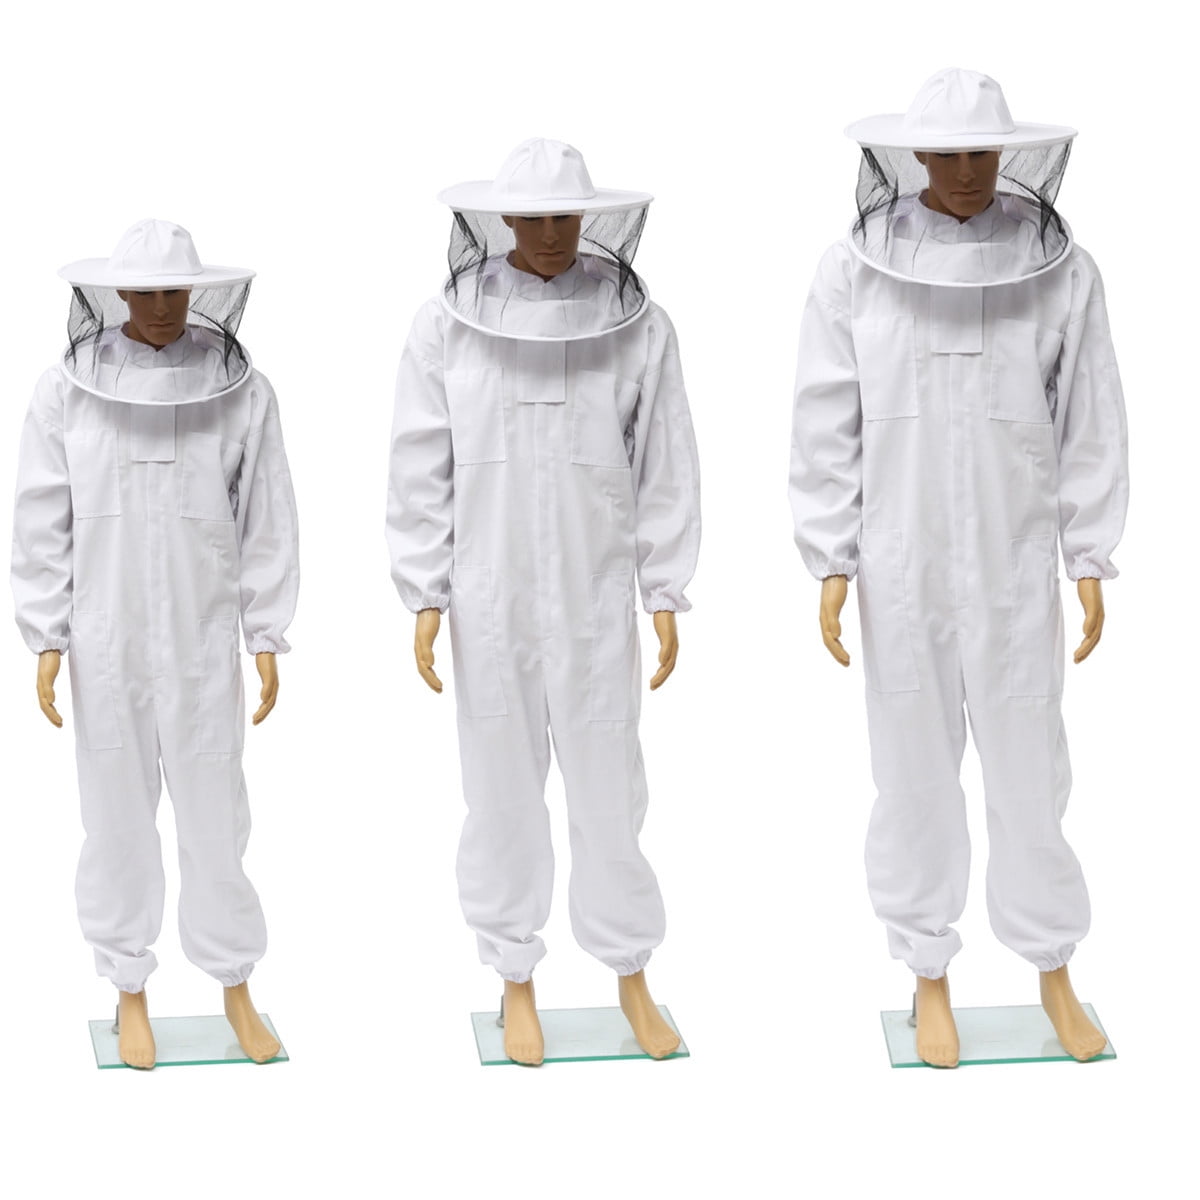 Brand New Beekeepers Suit With Fencing Veil M,L,XXL,XXXL 